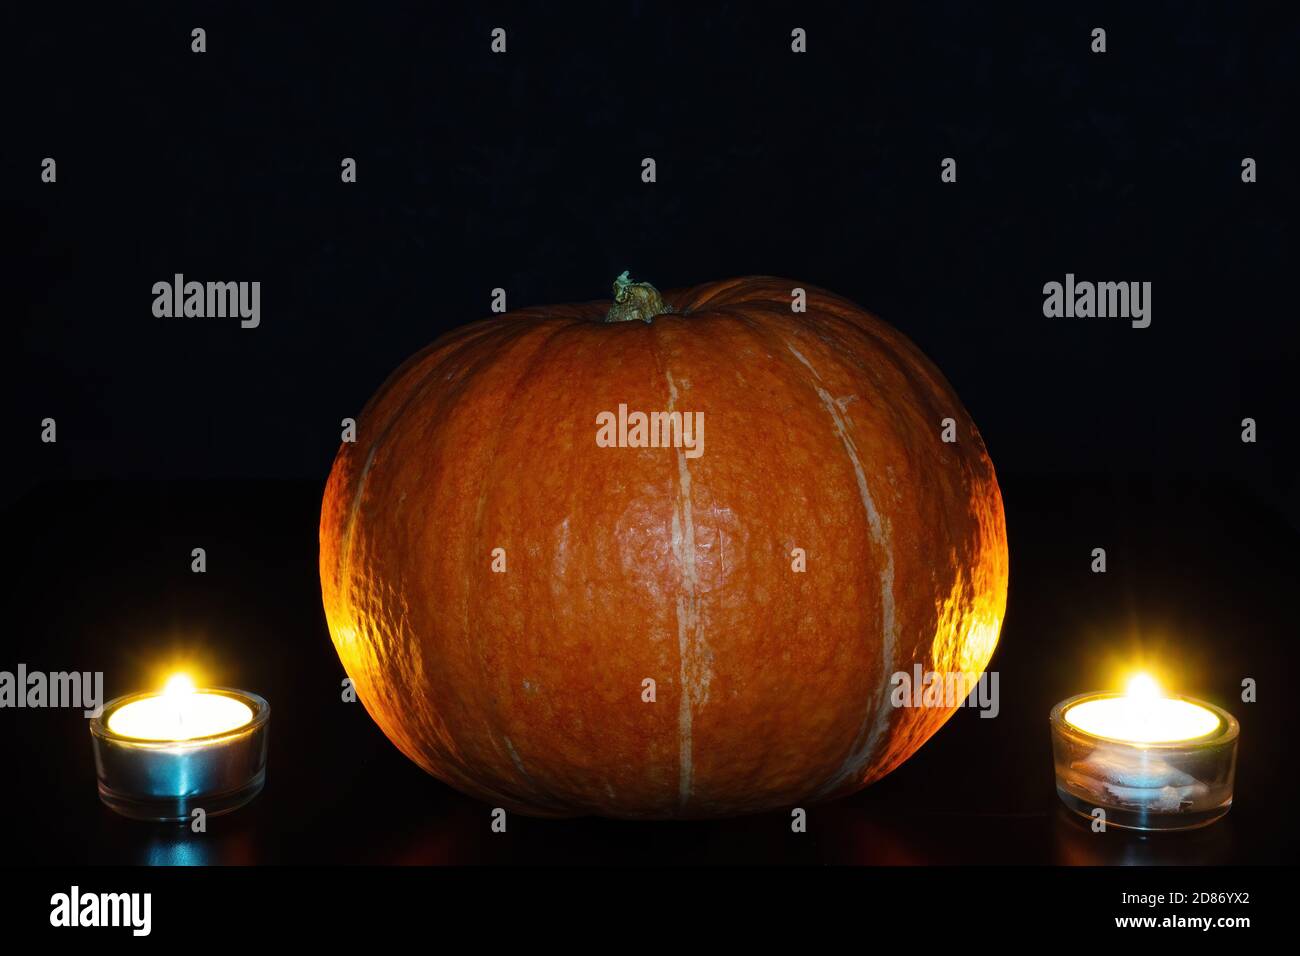 Orange pumpkin and two lighted tea candles on black background. Halloween concept Stock Photo